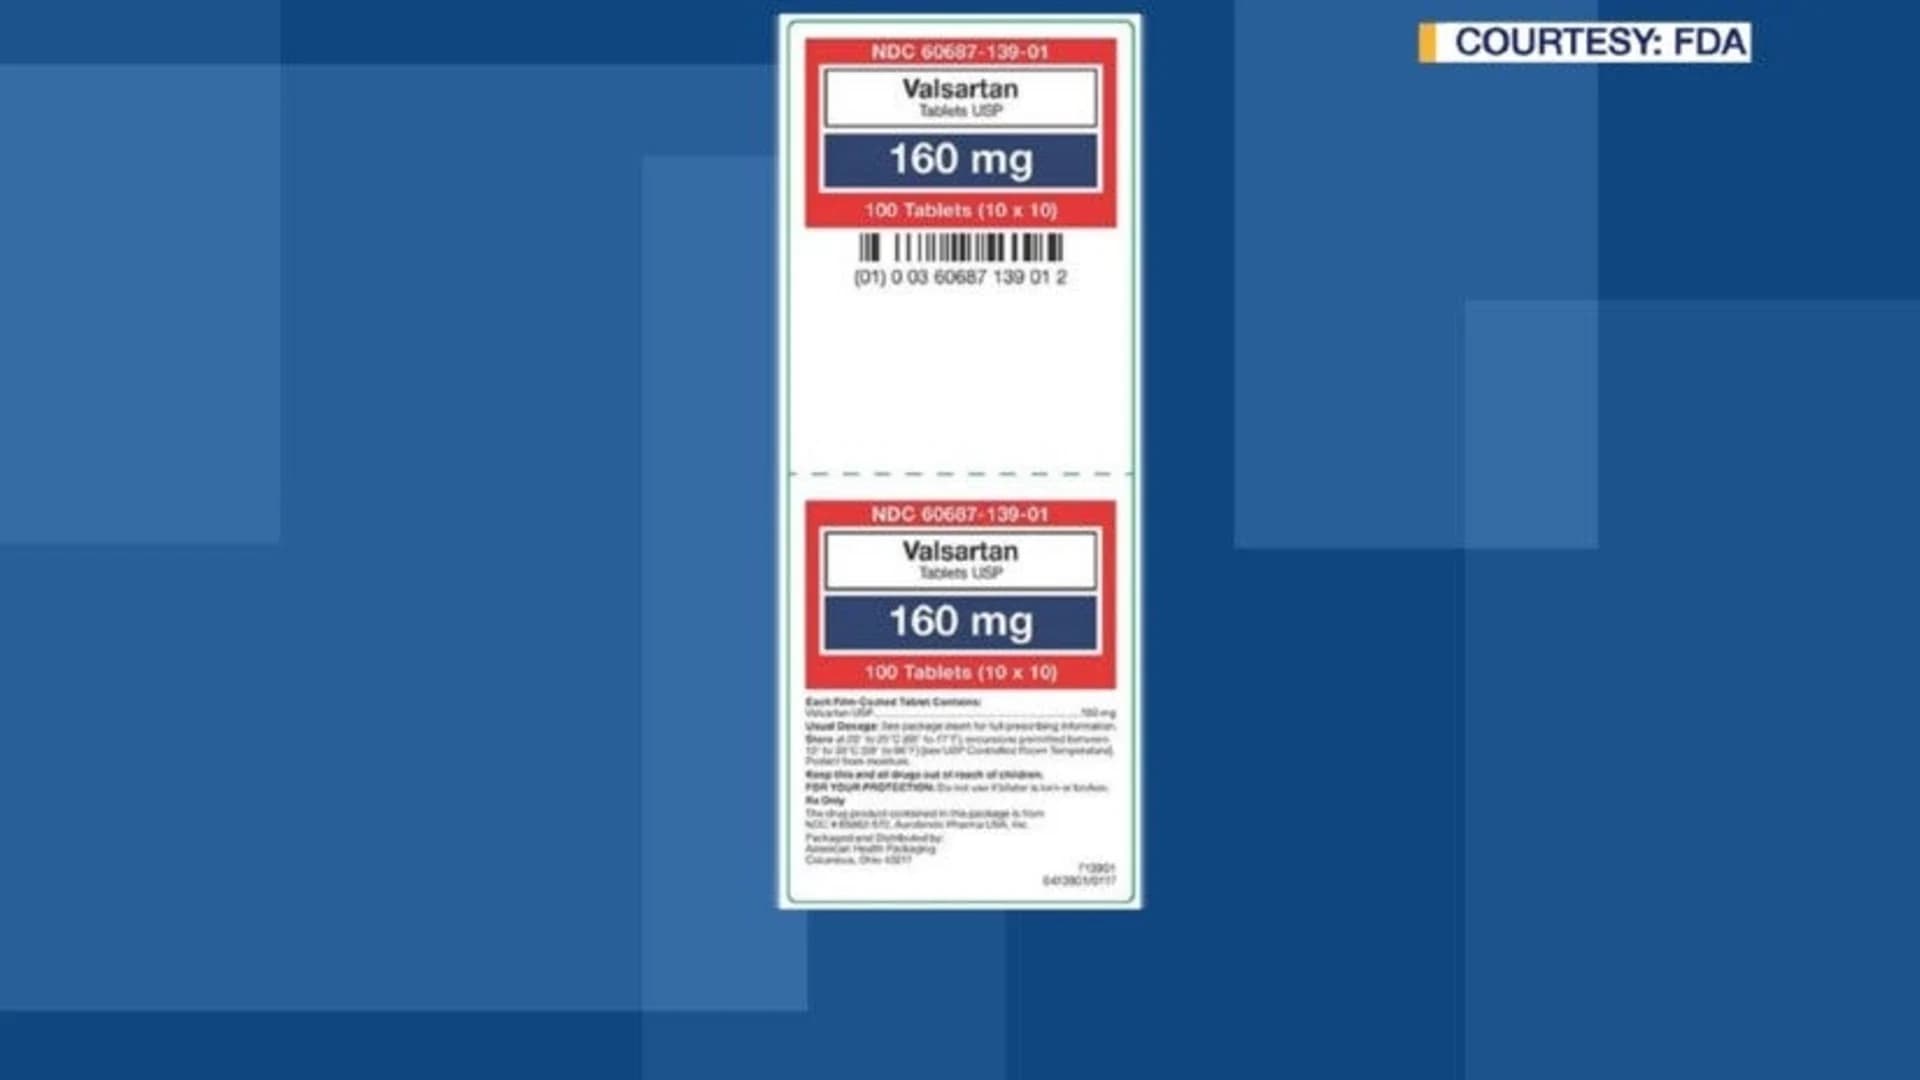 Blood pressure medication recalled due to possible carcinogen